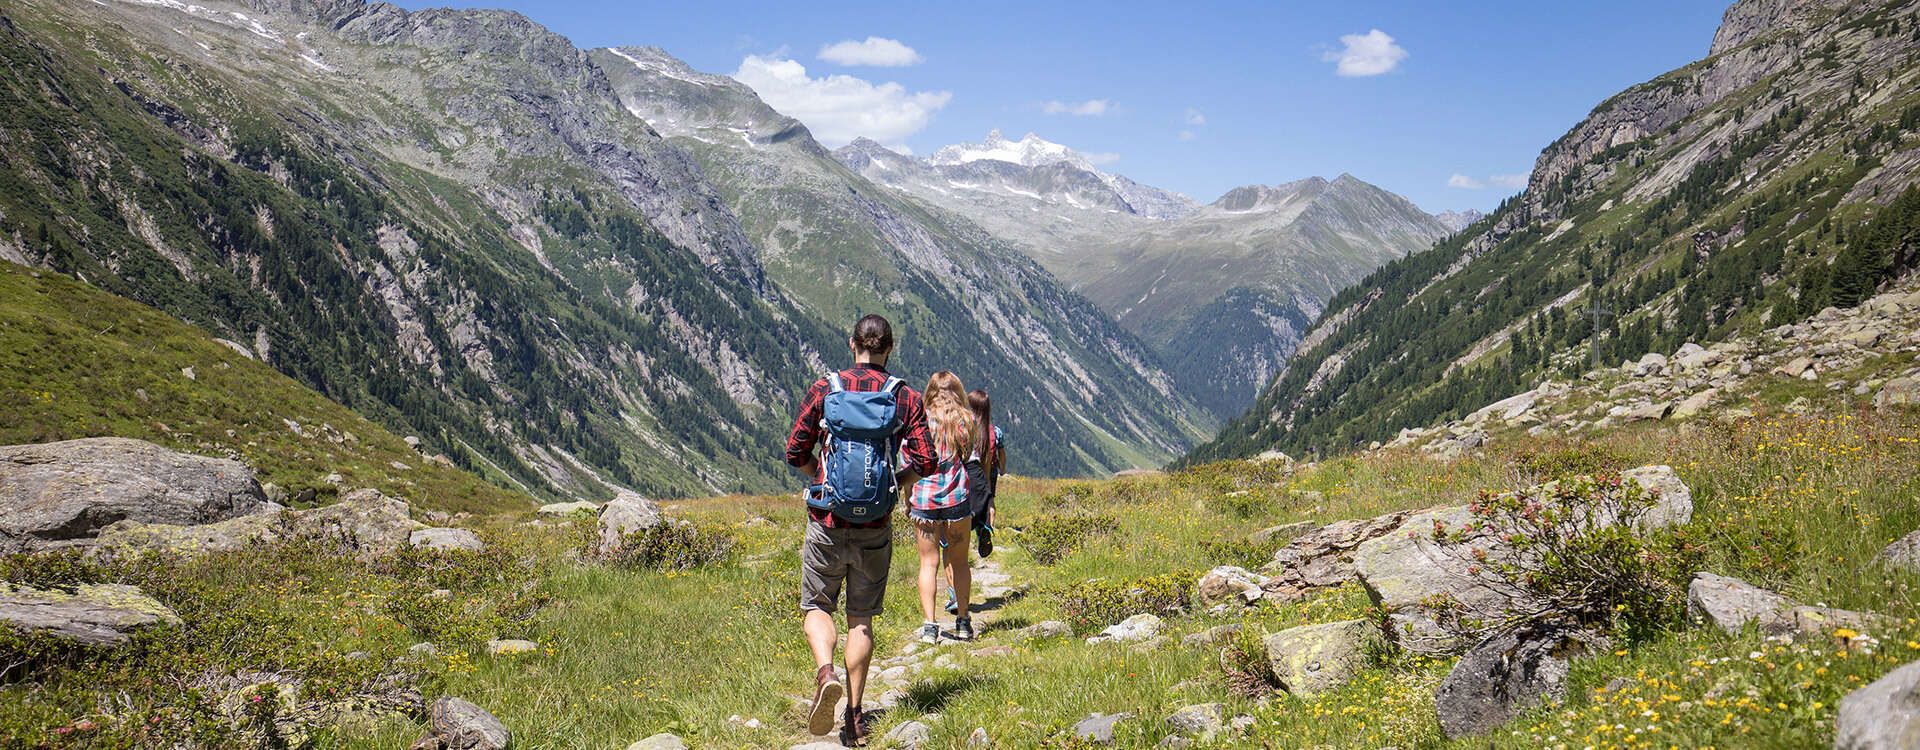 Hiking in summer in the Zillertal